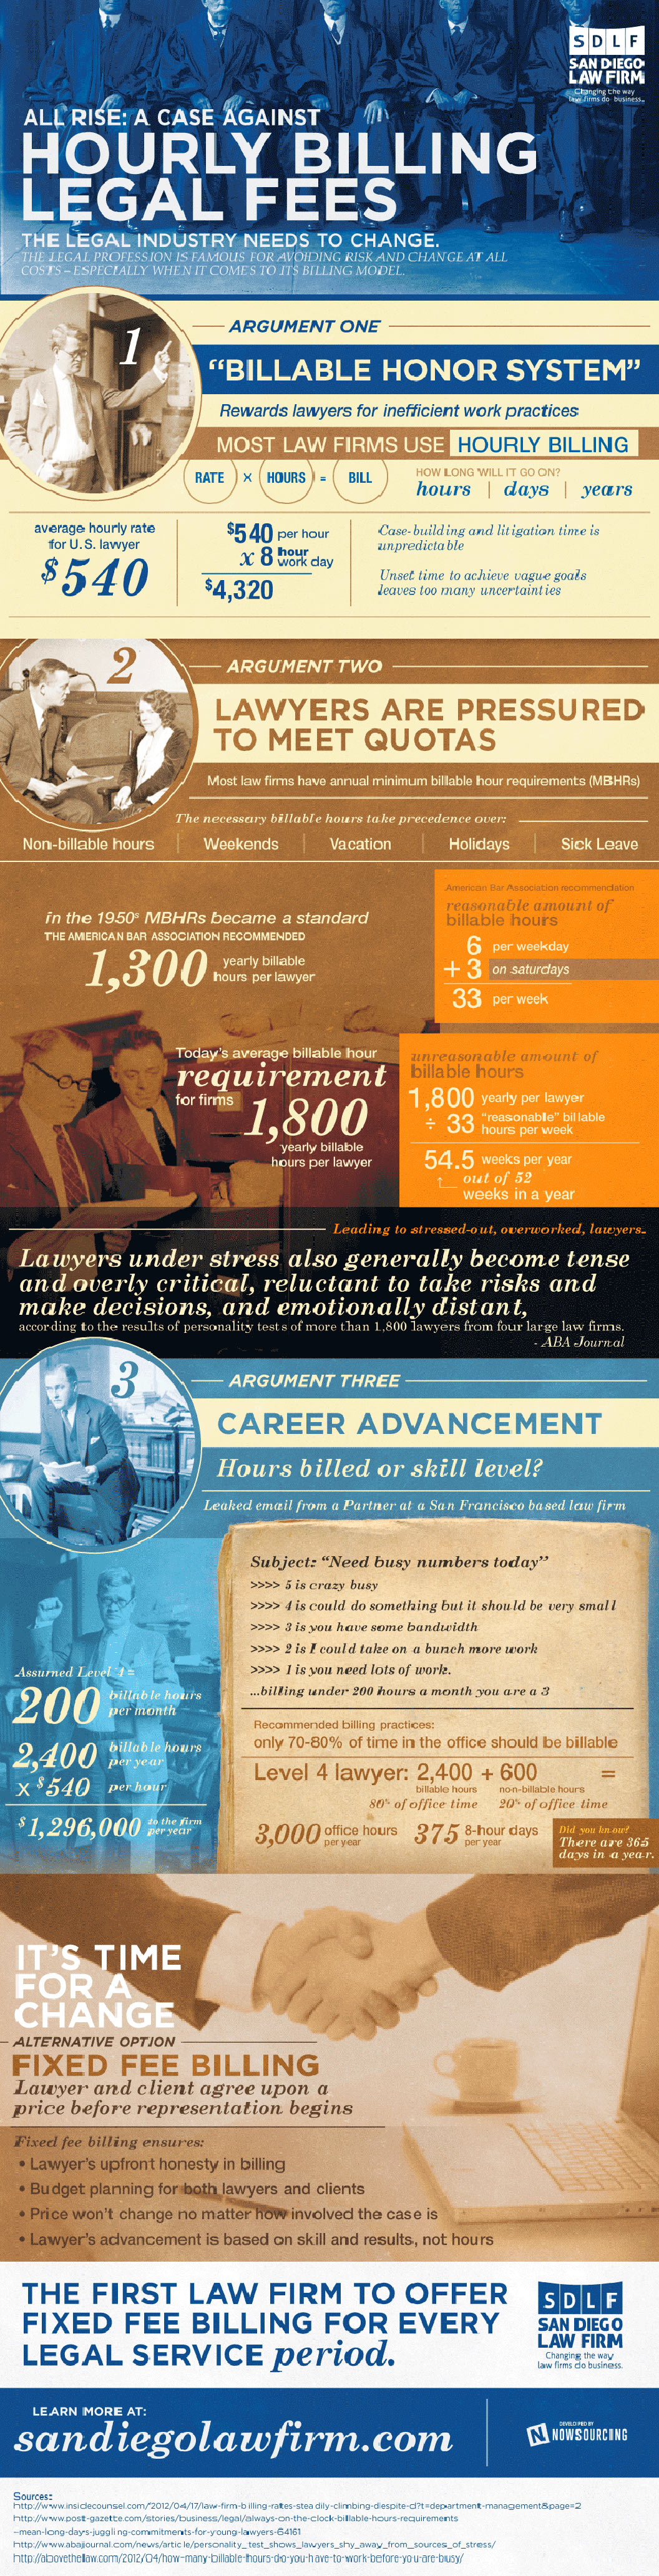 All Rise A Case Against Hourly Billing Legal Fees - Law Infographic